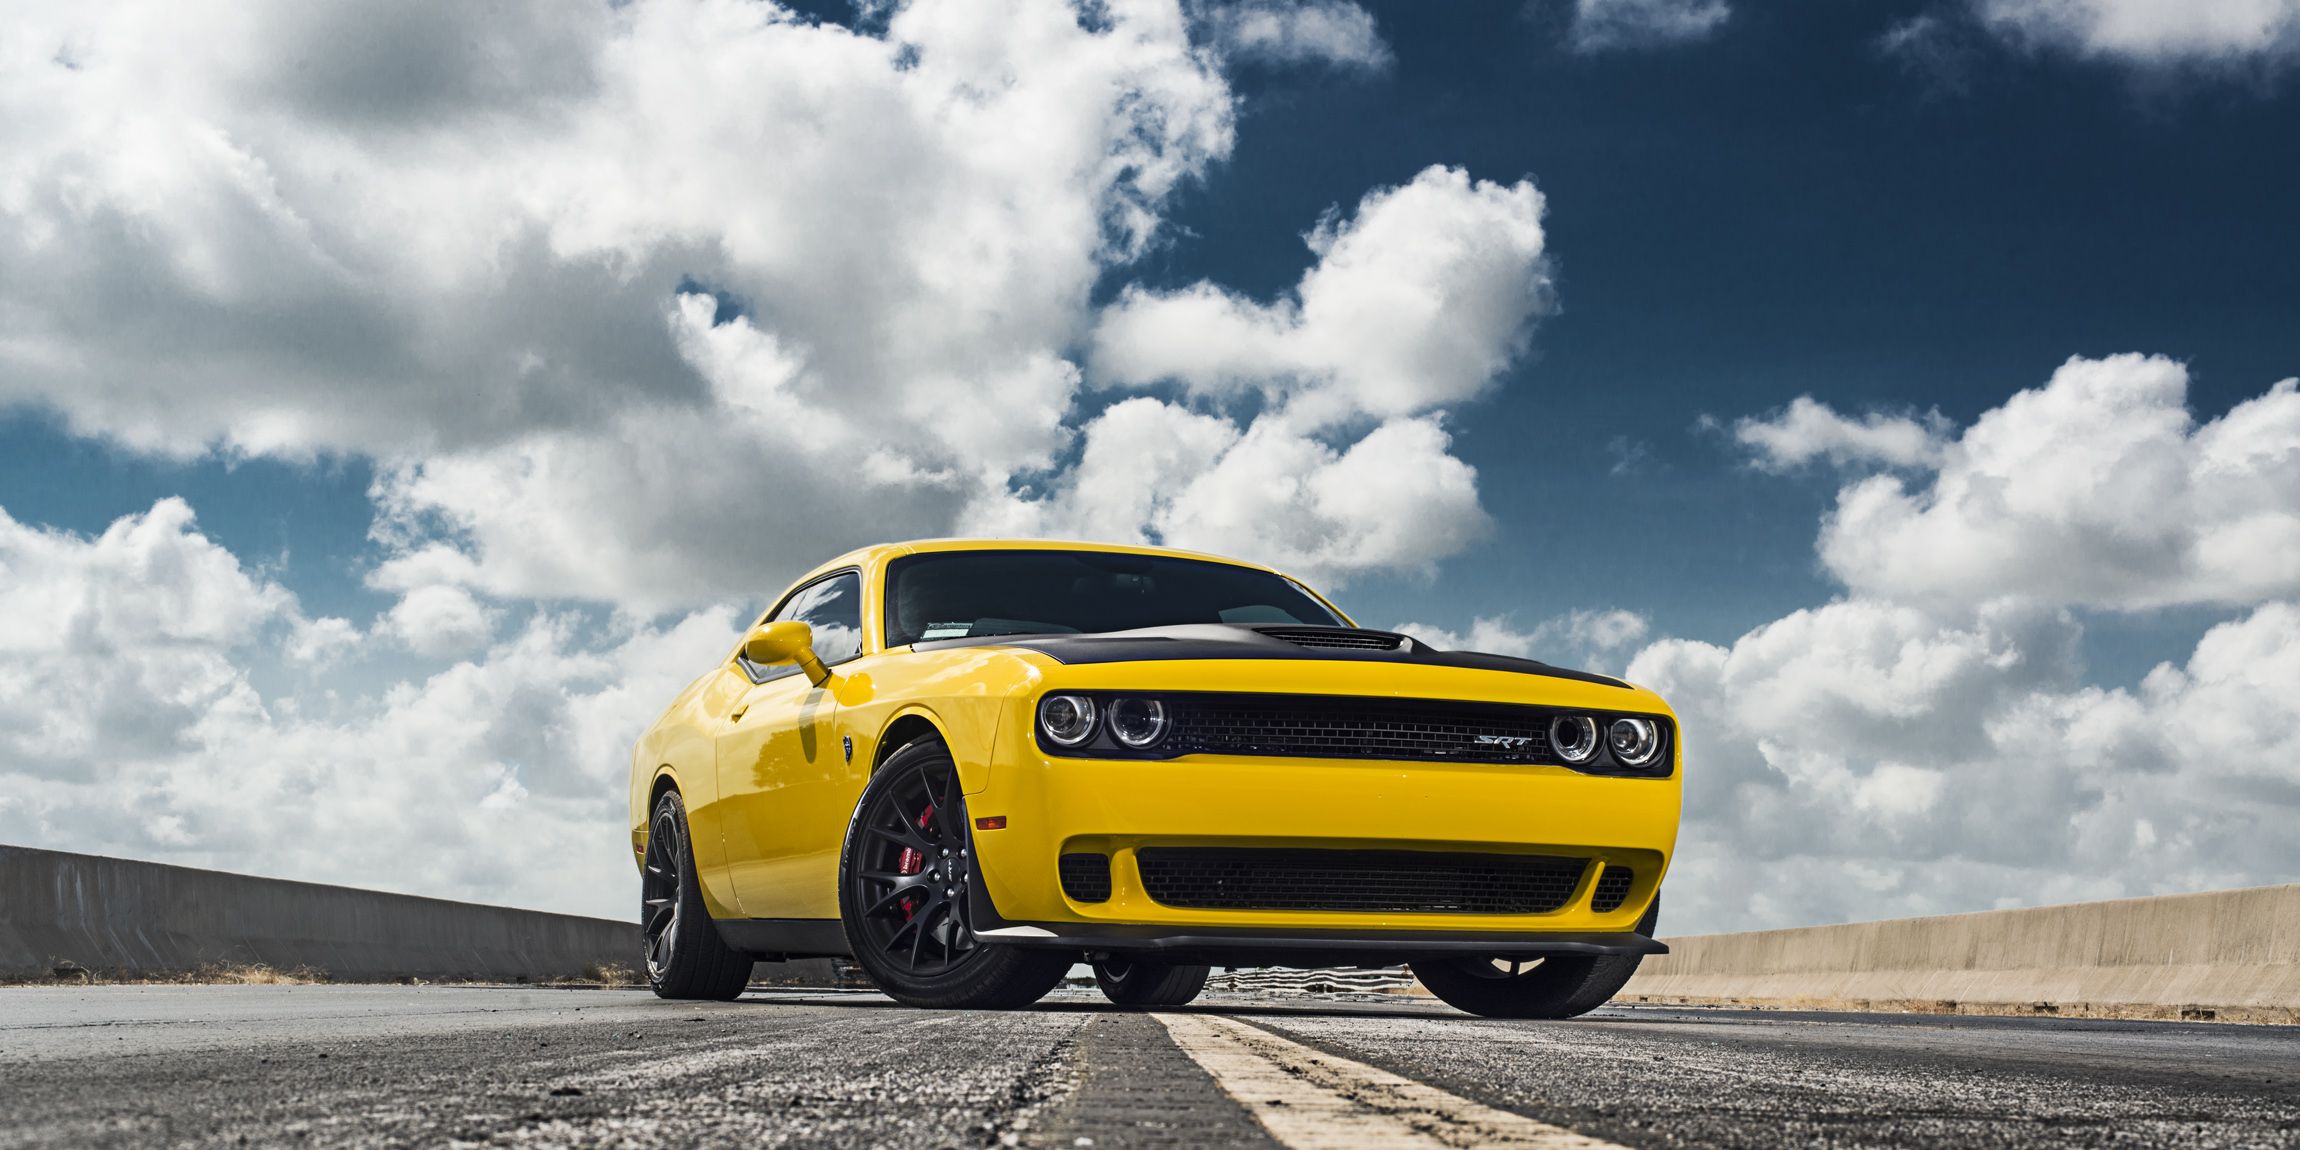 Hellcat Driver Caught Going 165 MPH Gets Off With a $450 Ticket